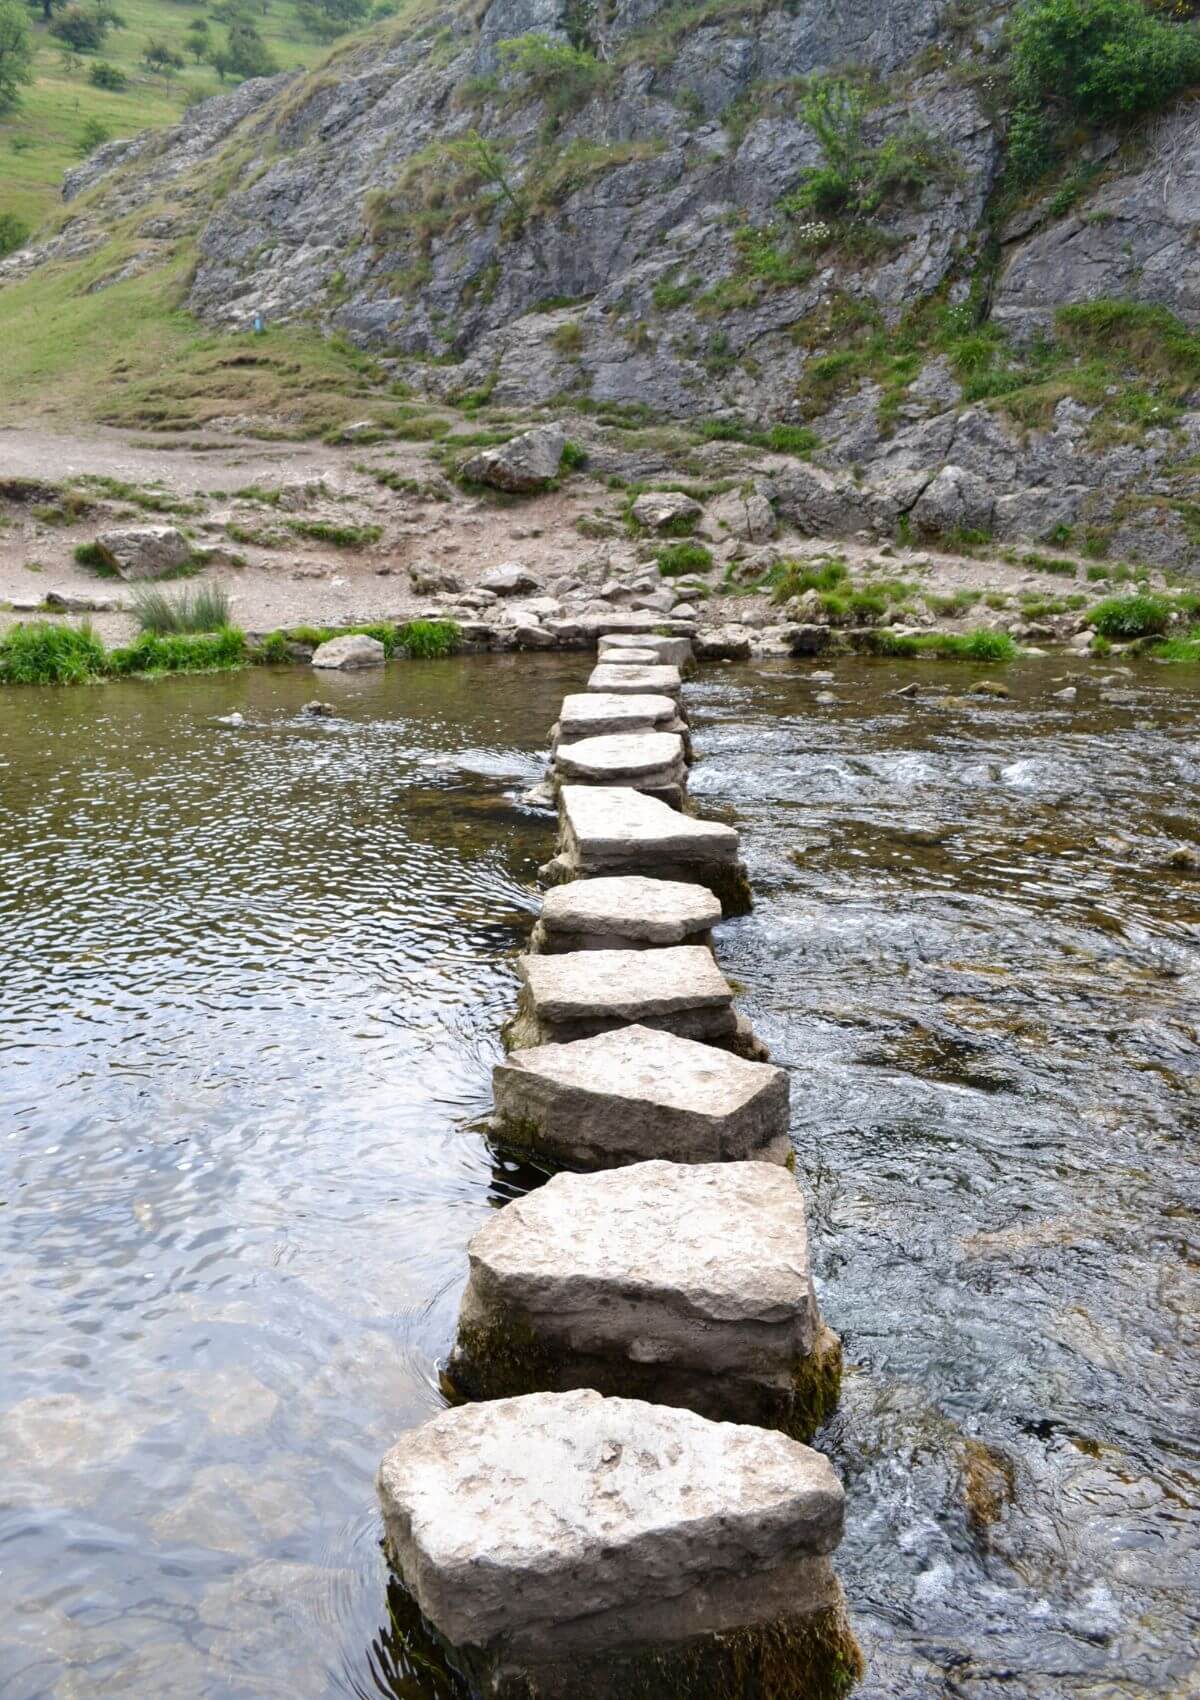 Day trip to the Dovedale Stepping Stones from Derby